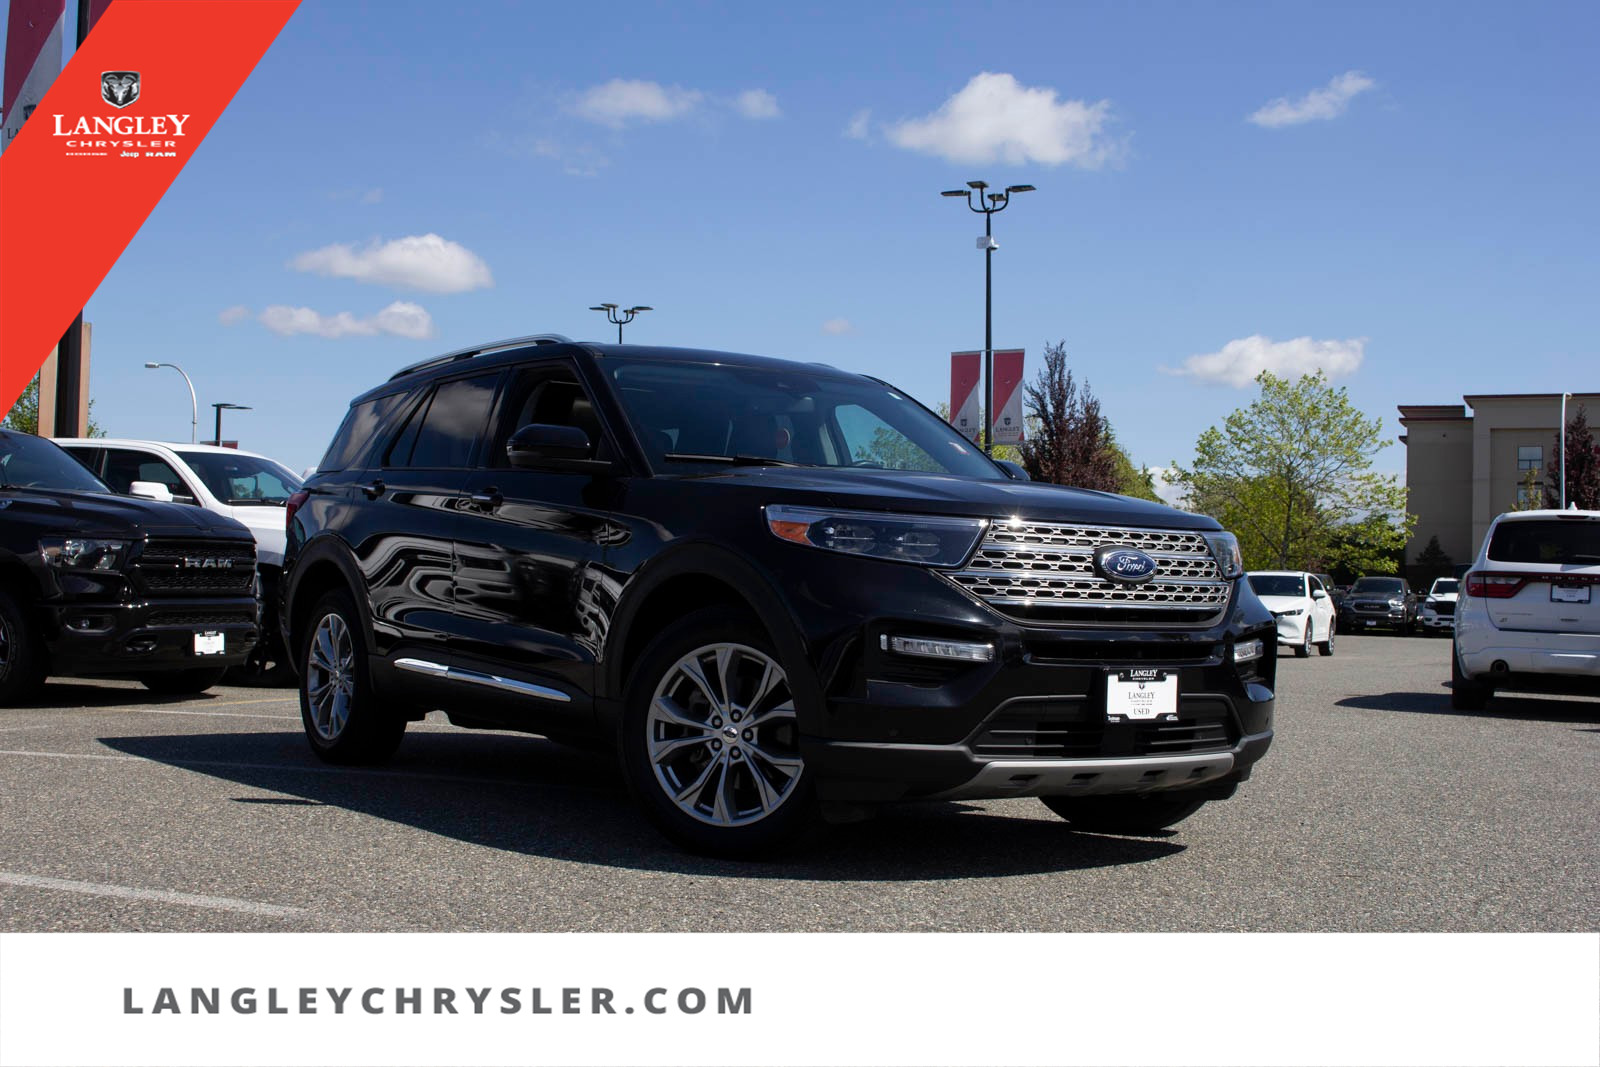 2021 Ford Explorer Limited Pano- Sunroof | Leather | Navi | Seats 7